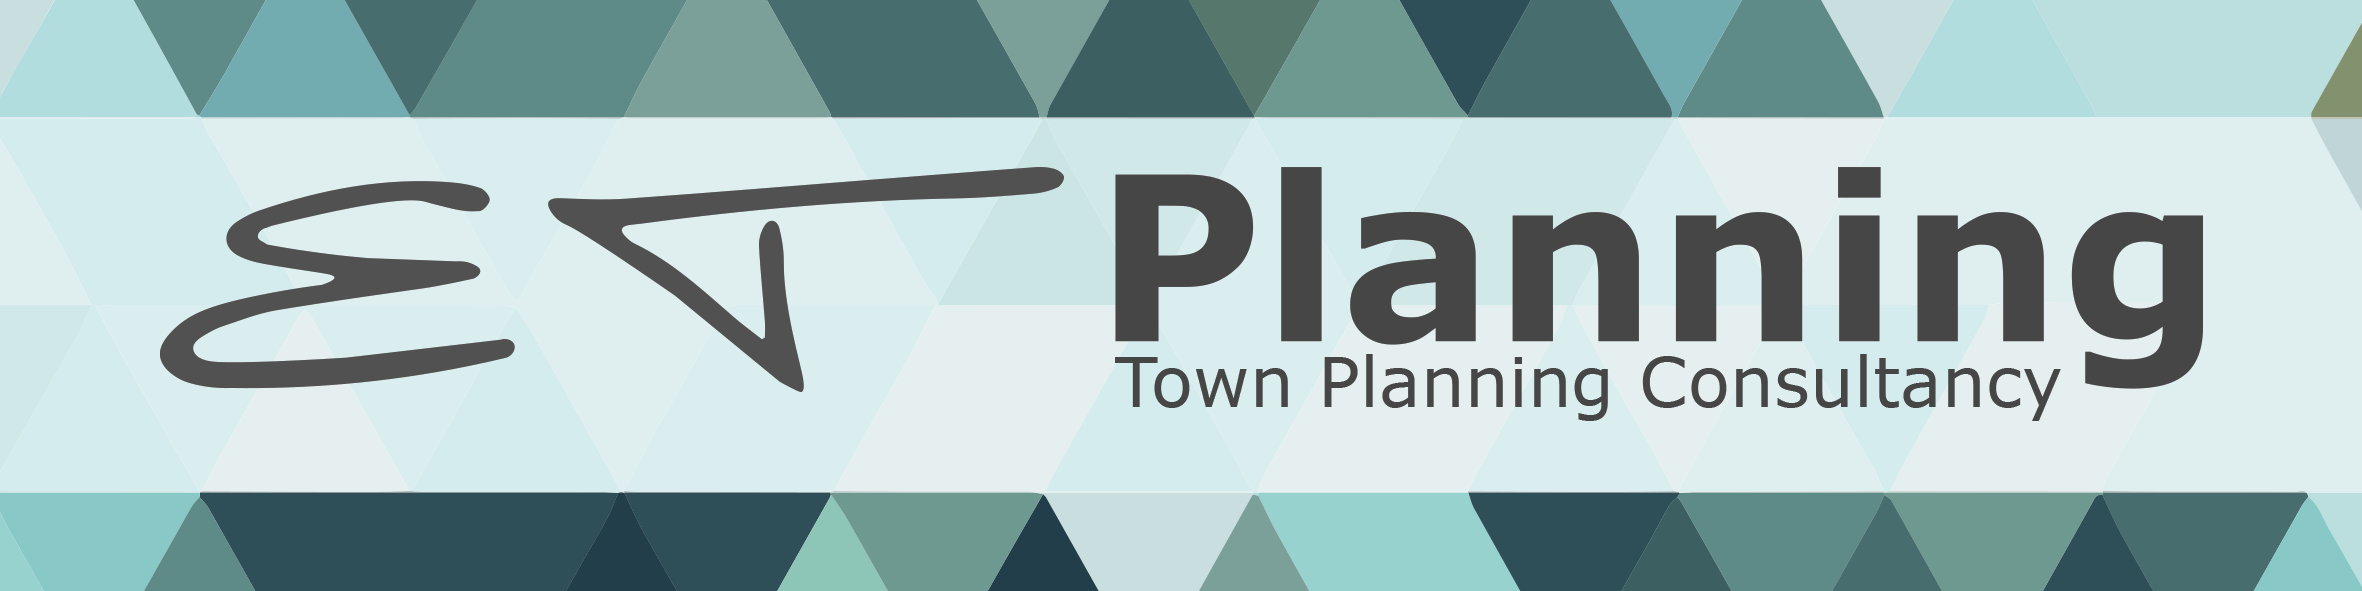 DM9 Logo - Policy DM9 | ETPlanning Town Planning Consultant